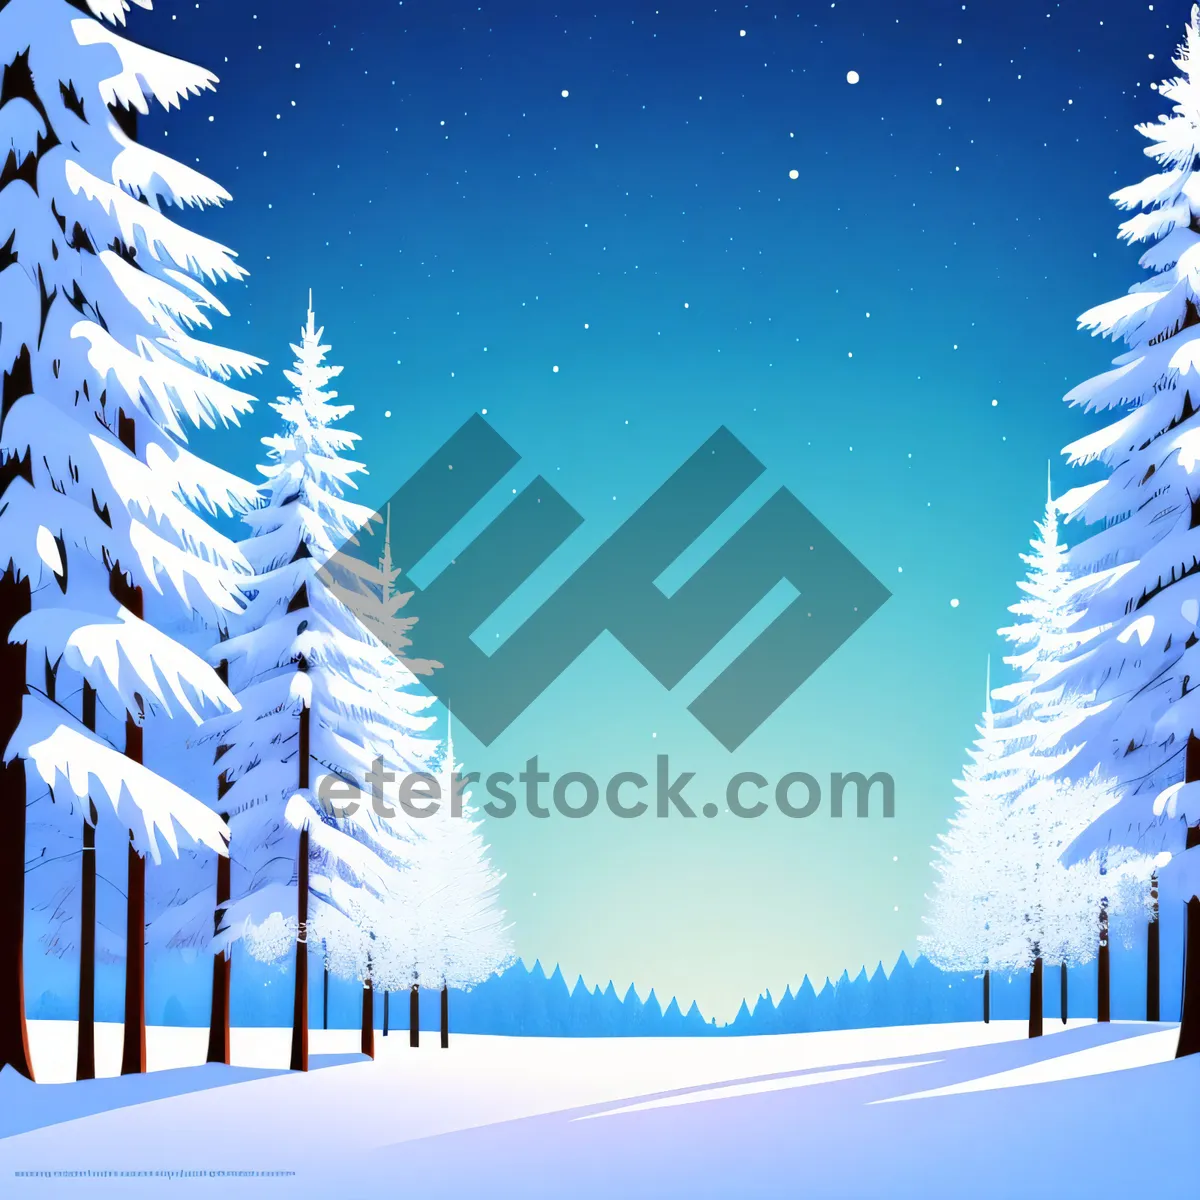 Picture of Winter Wonderland: Festive Fir Tree with Snowflake Ornaments